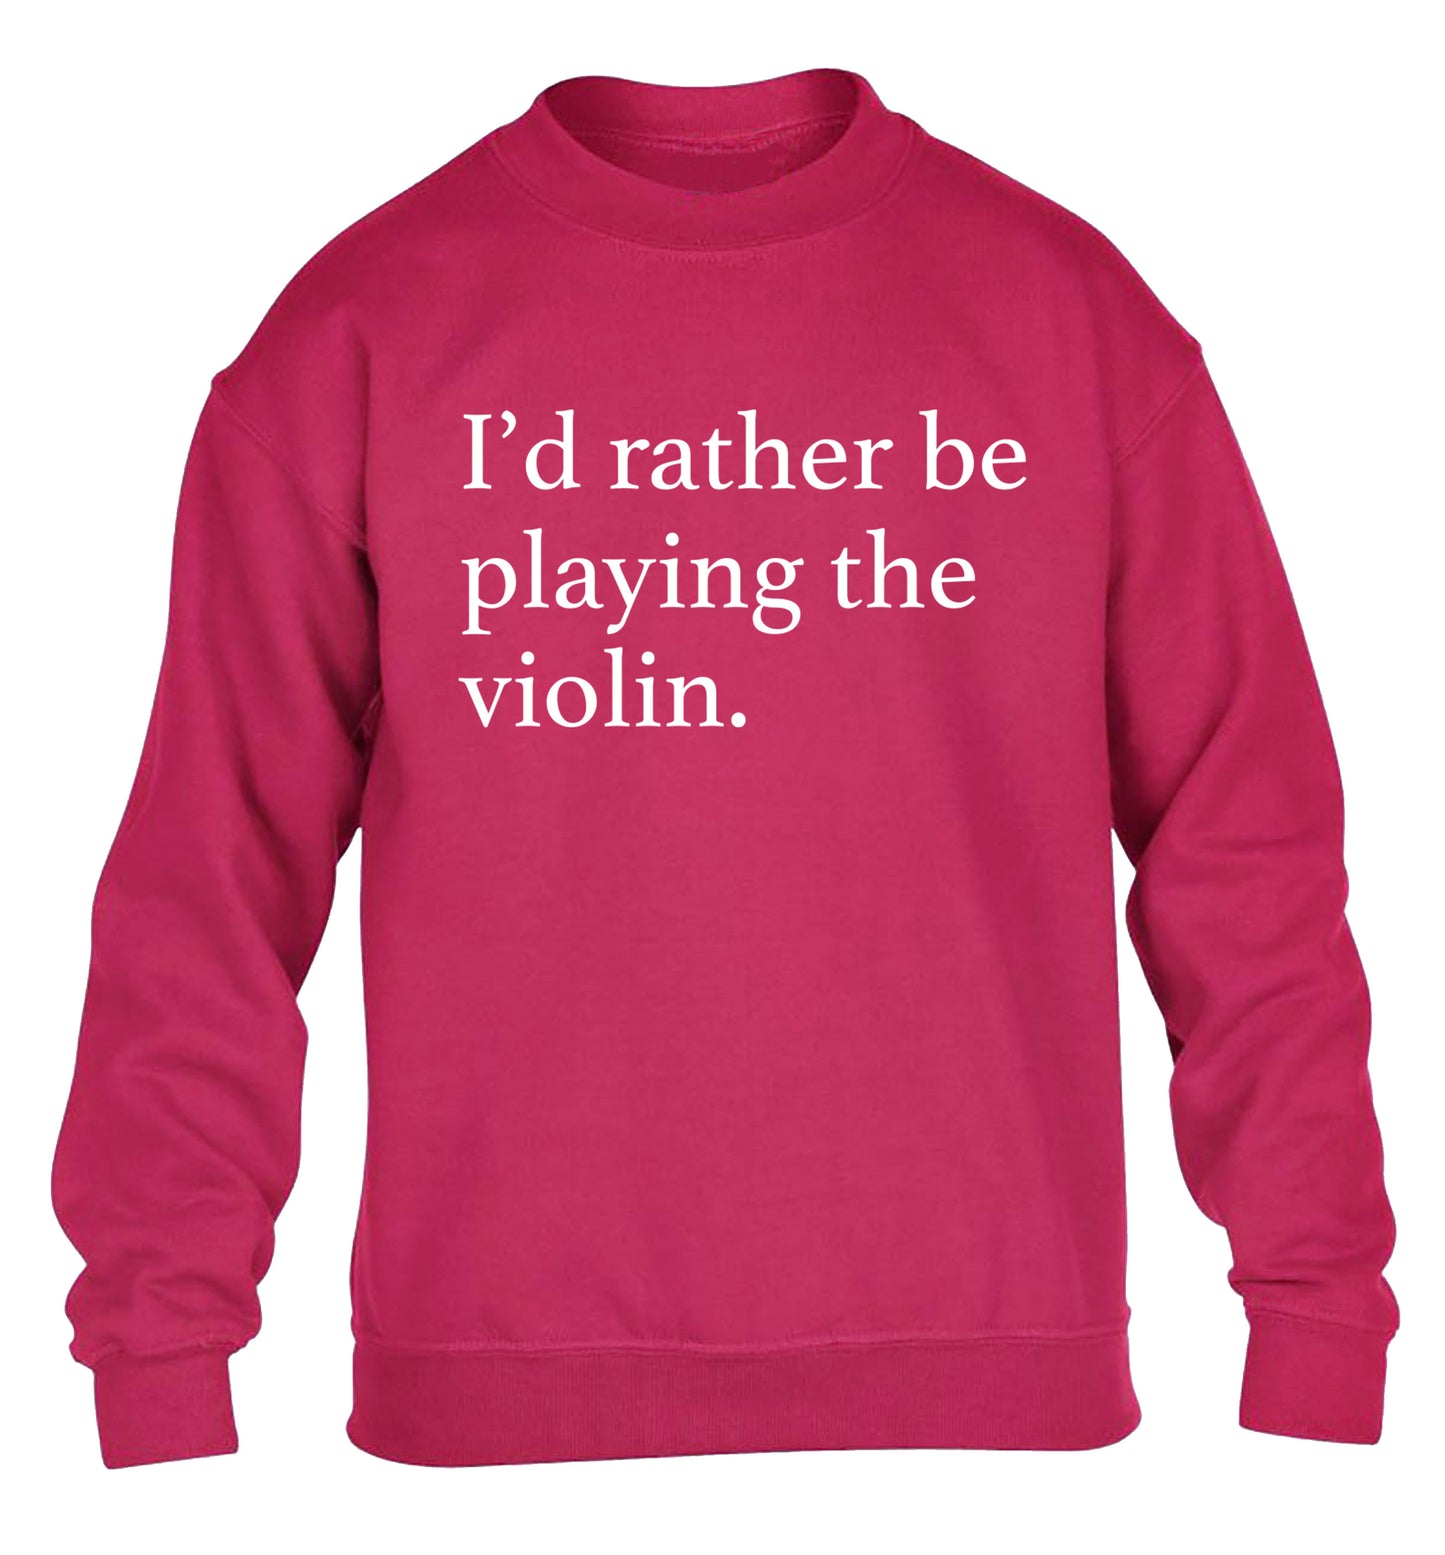 I'd rather be playing the violin children's pink sweater 12-13 Years